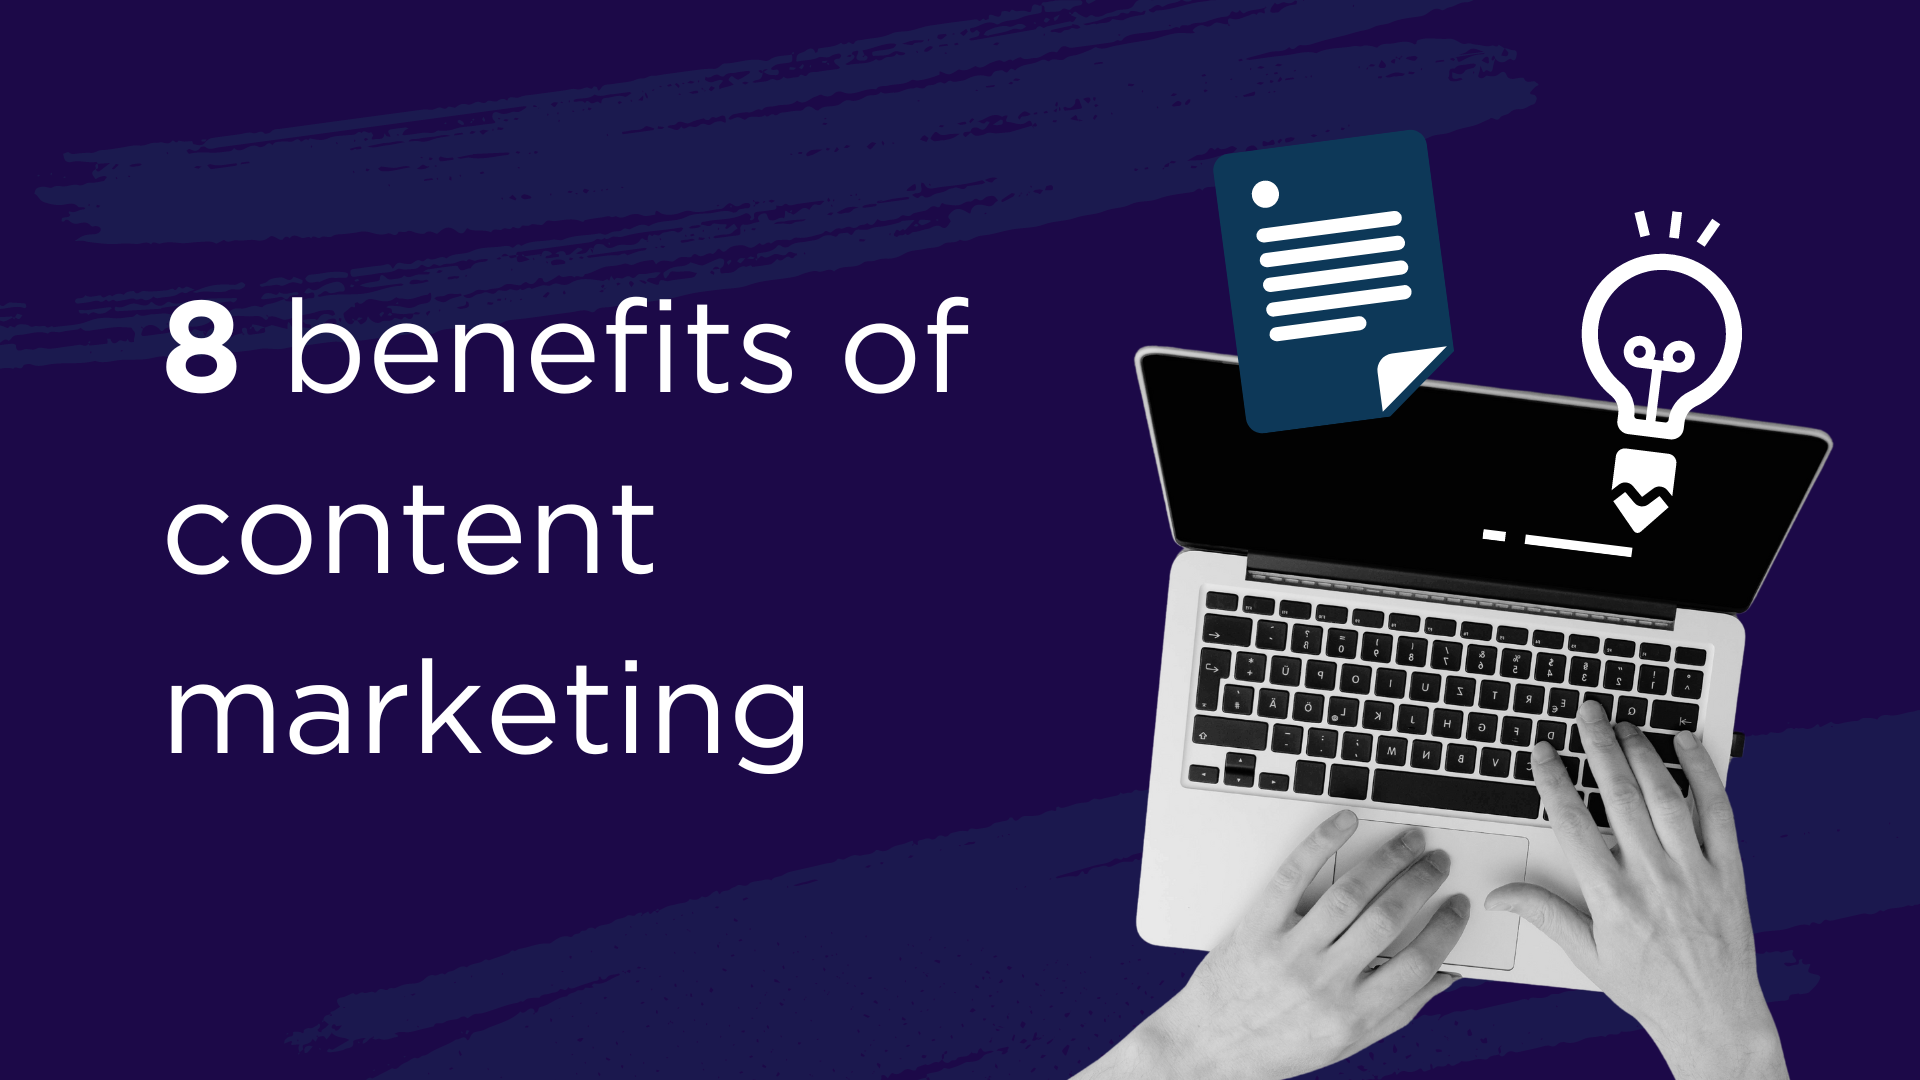 8 benefits of content marketing